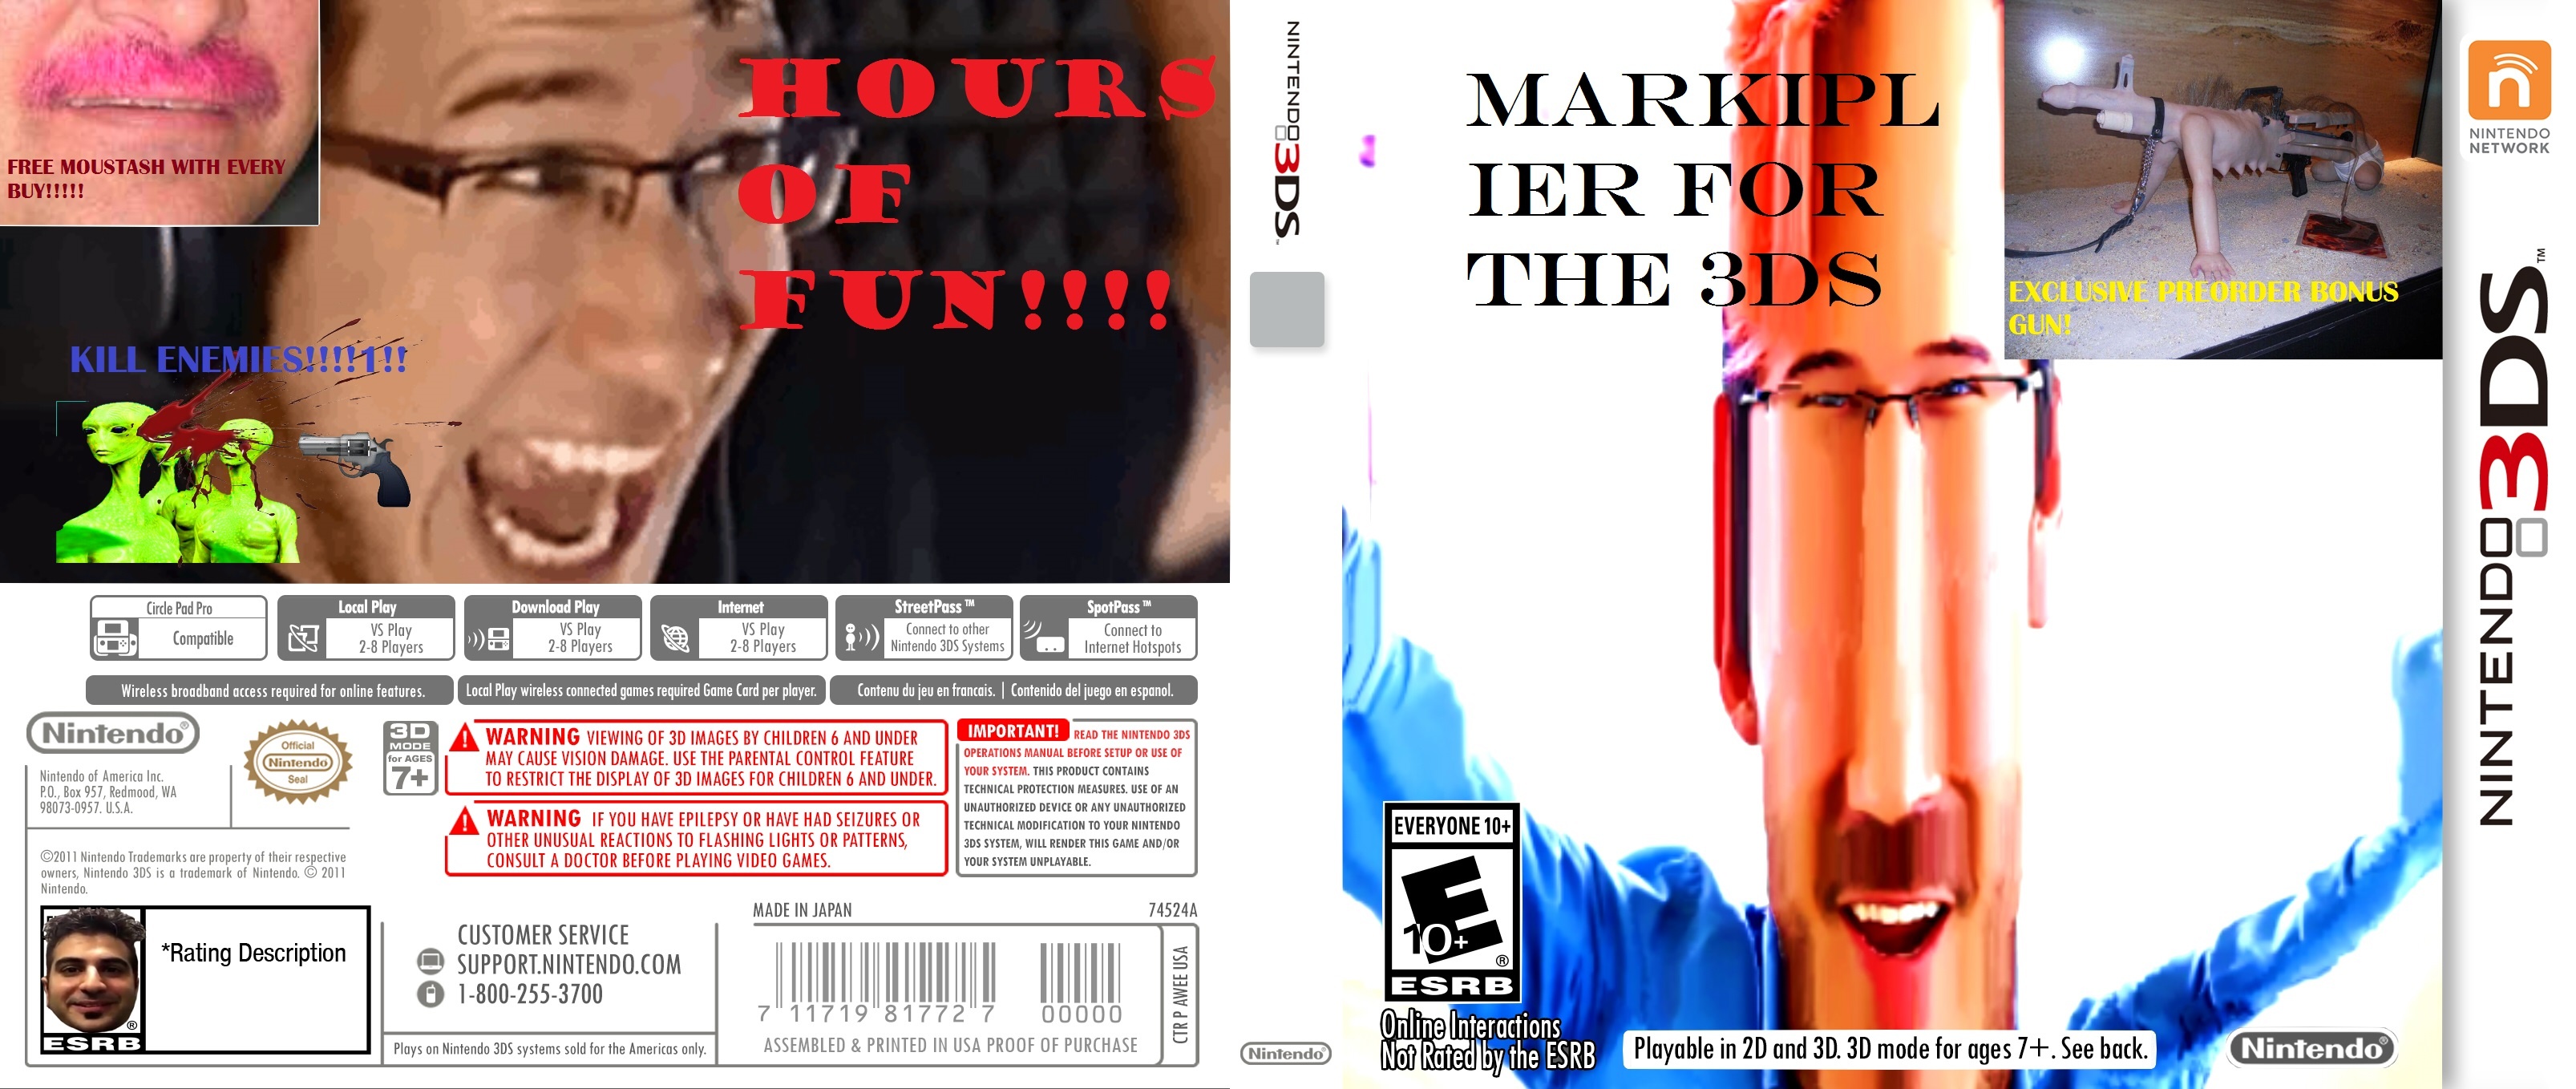 MARKIPLIER FOR THE 3DS box cover